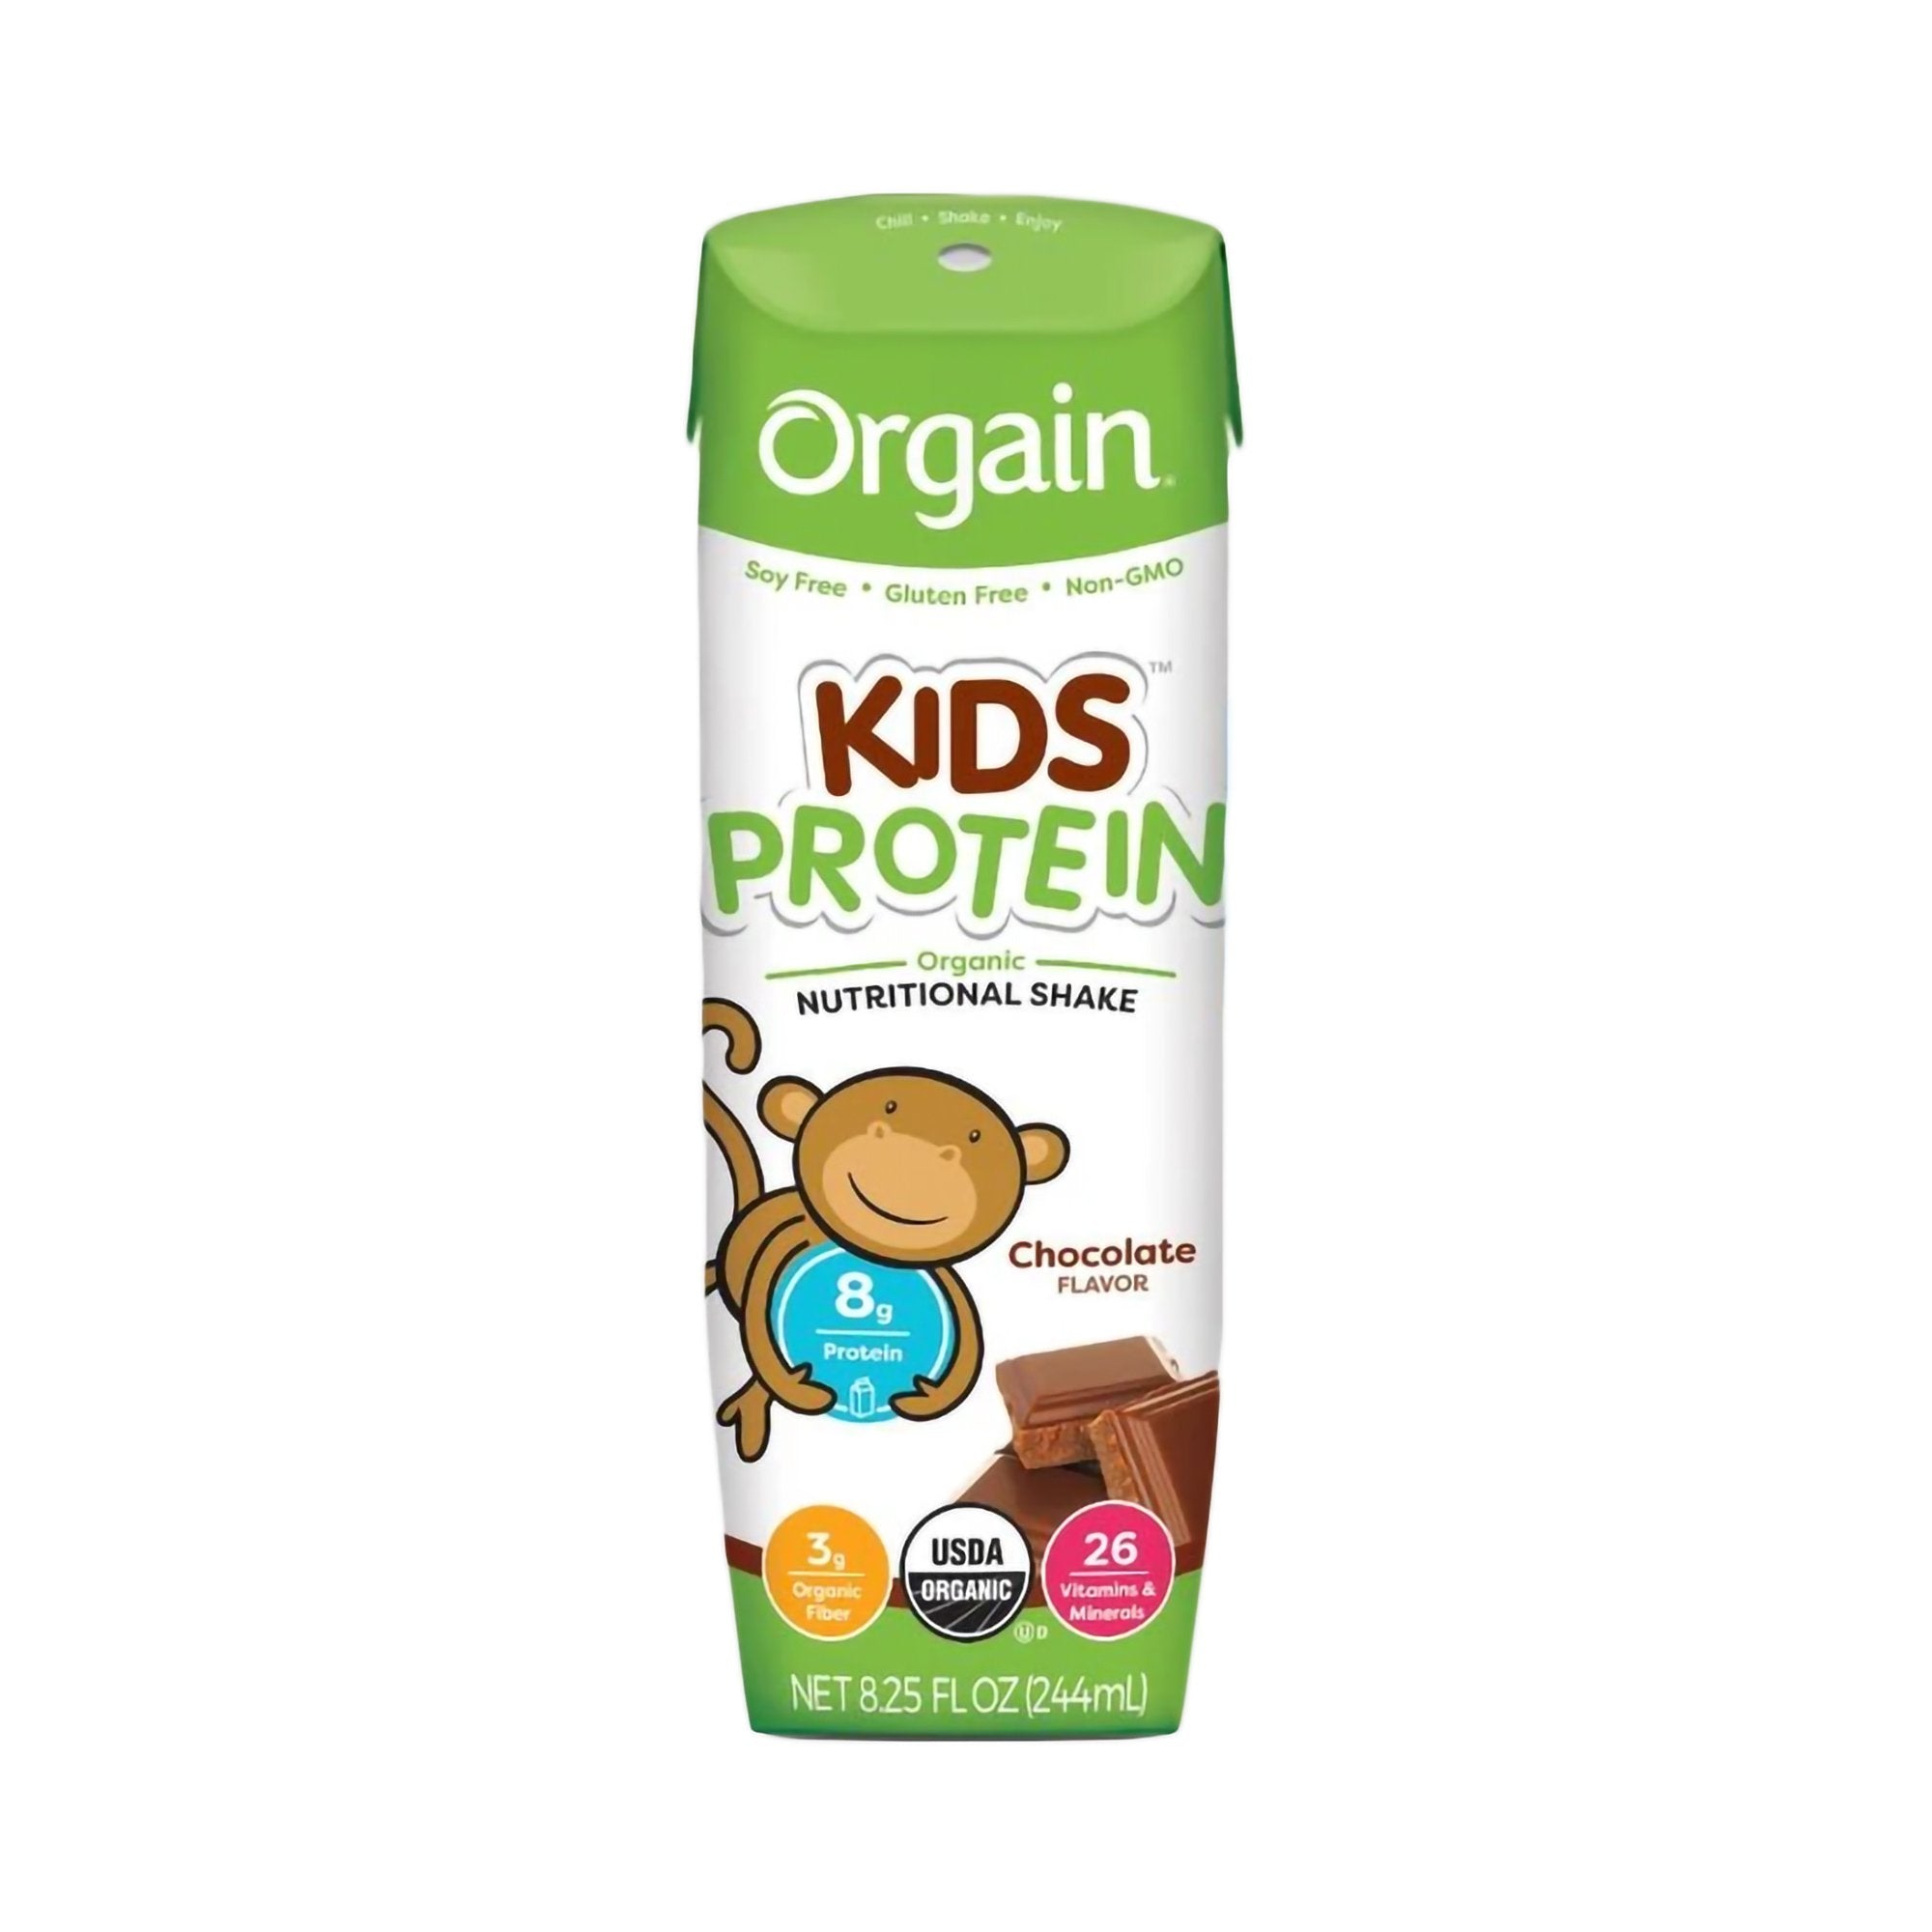 Kids Protein Organic Nutrition Shake by Orgain: Lowest Prices at